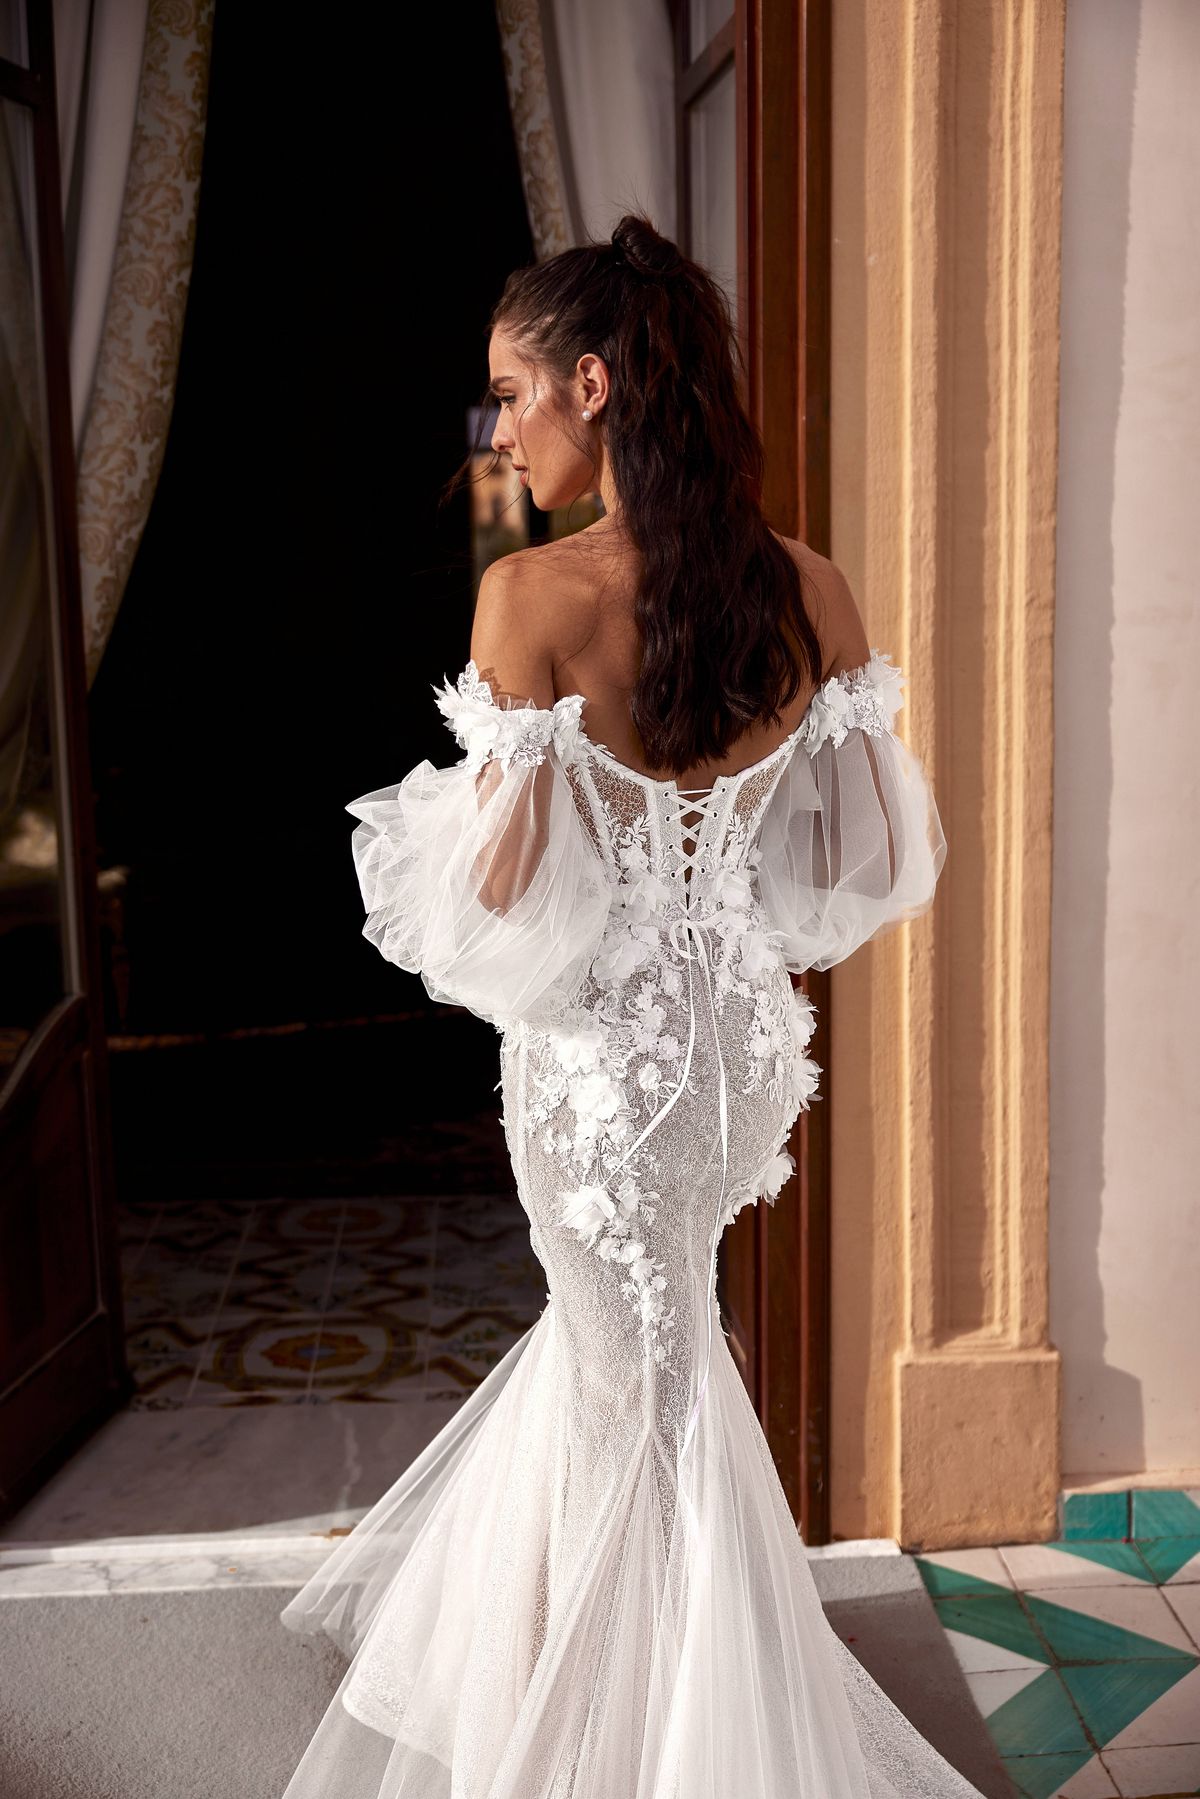 Mermaid lace wedding dress with removable voluminous sleeves and decorated with flowers. 5